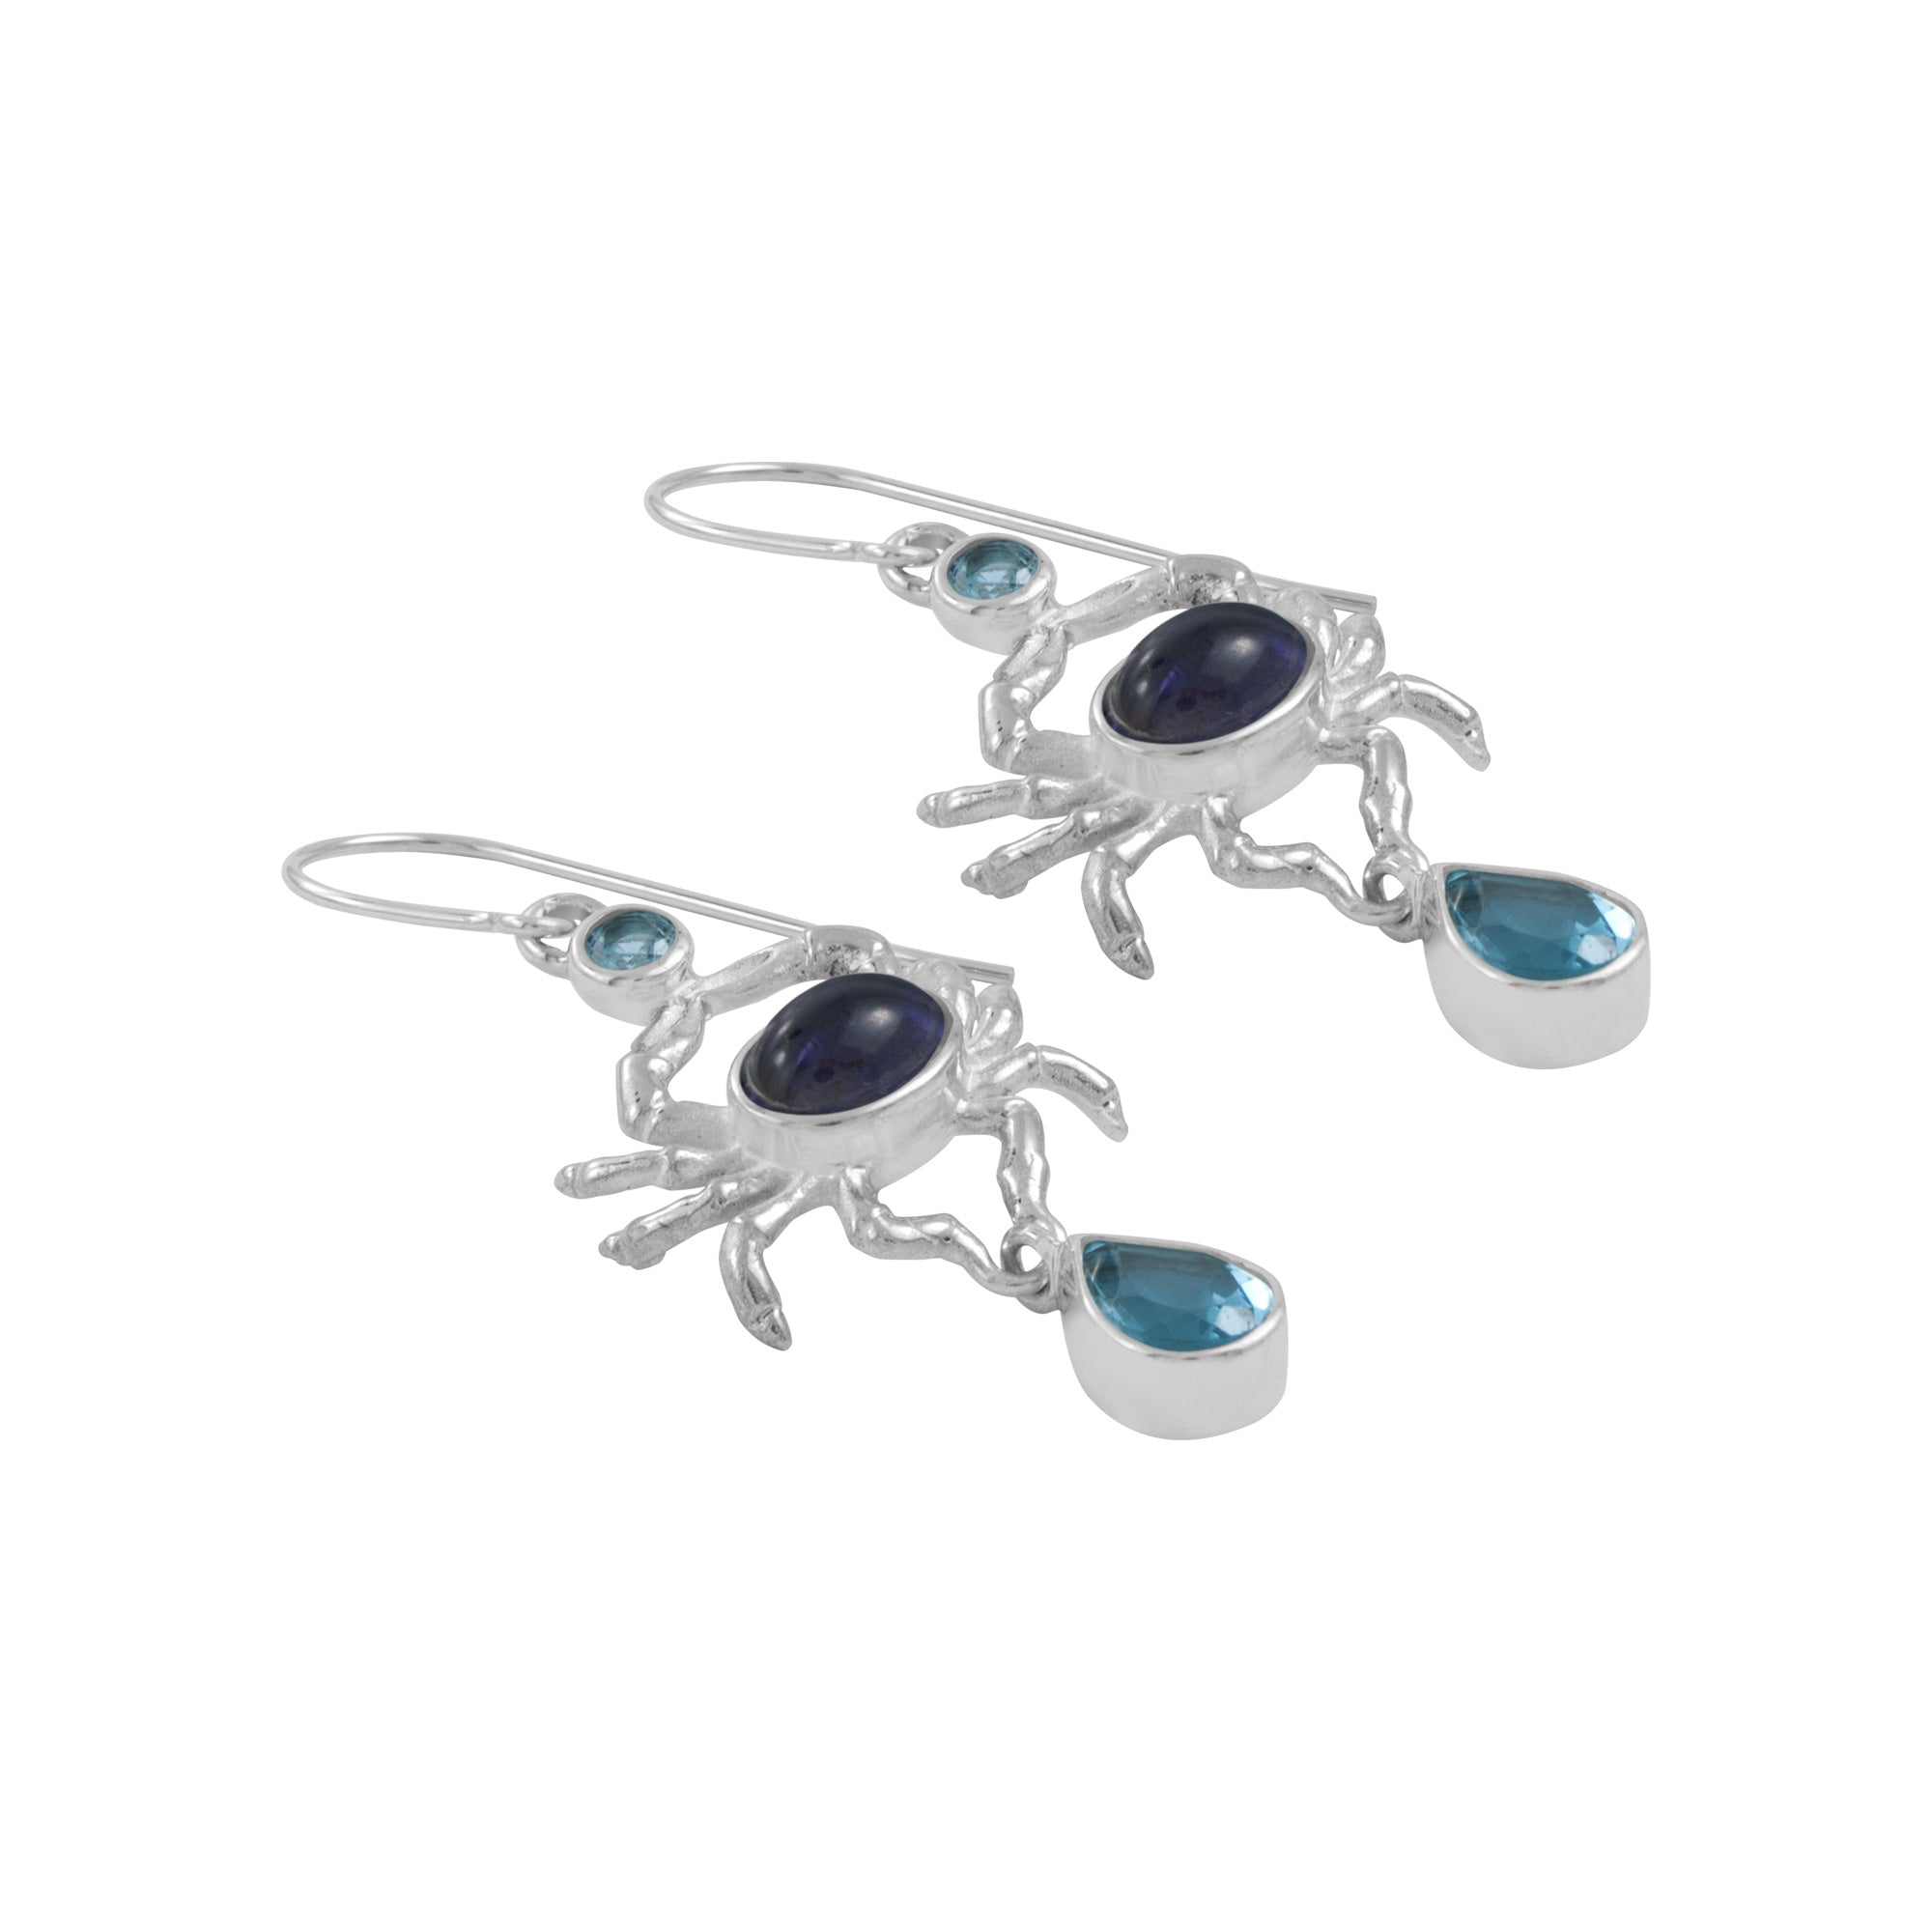 Blue Crab Earrings with blue topaz and Iolite!